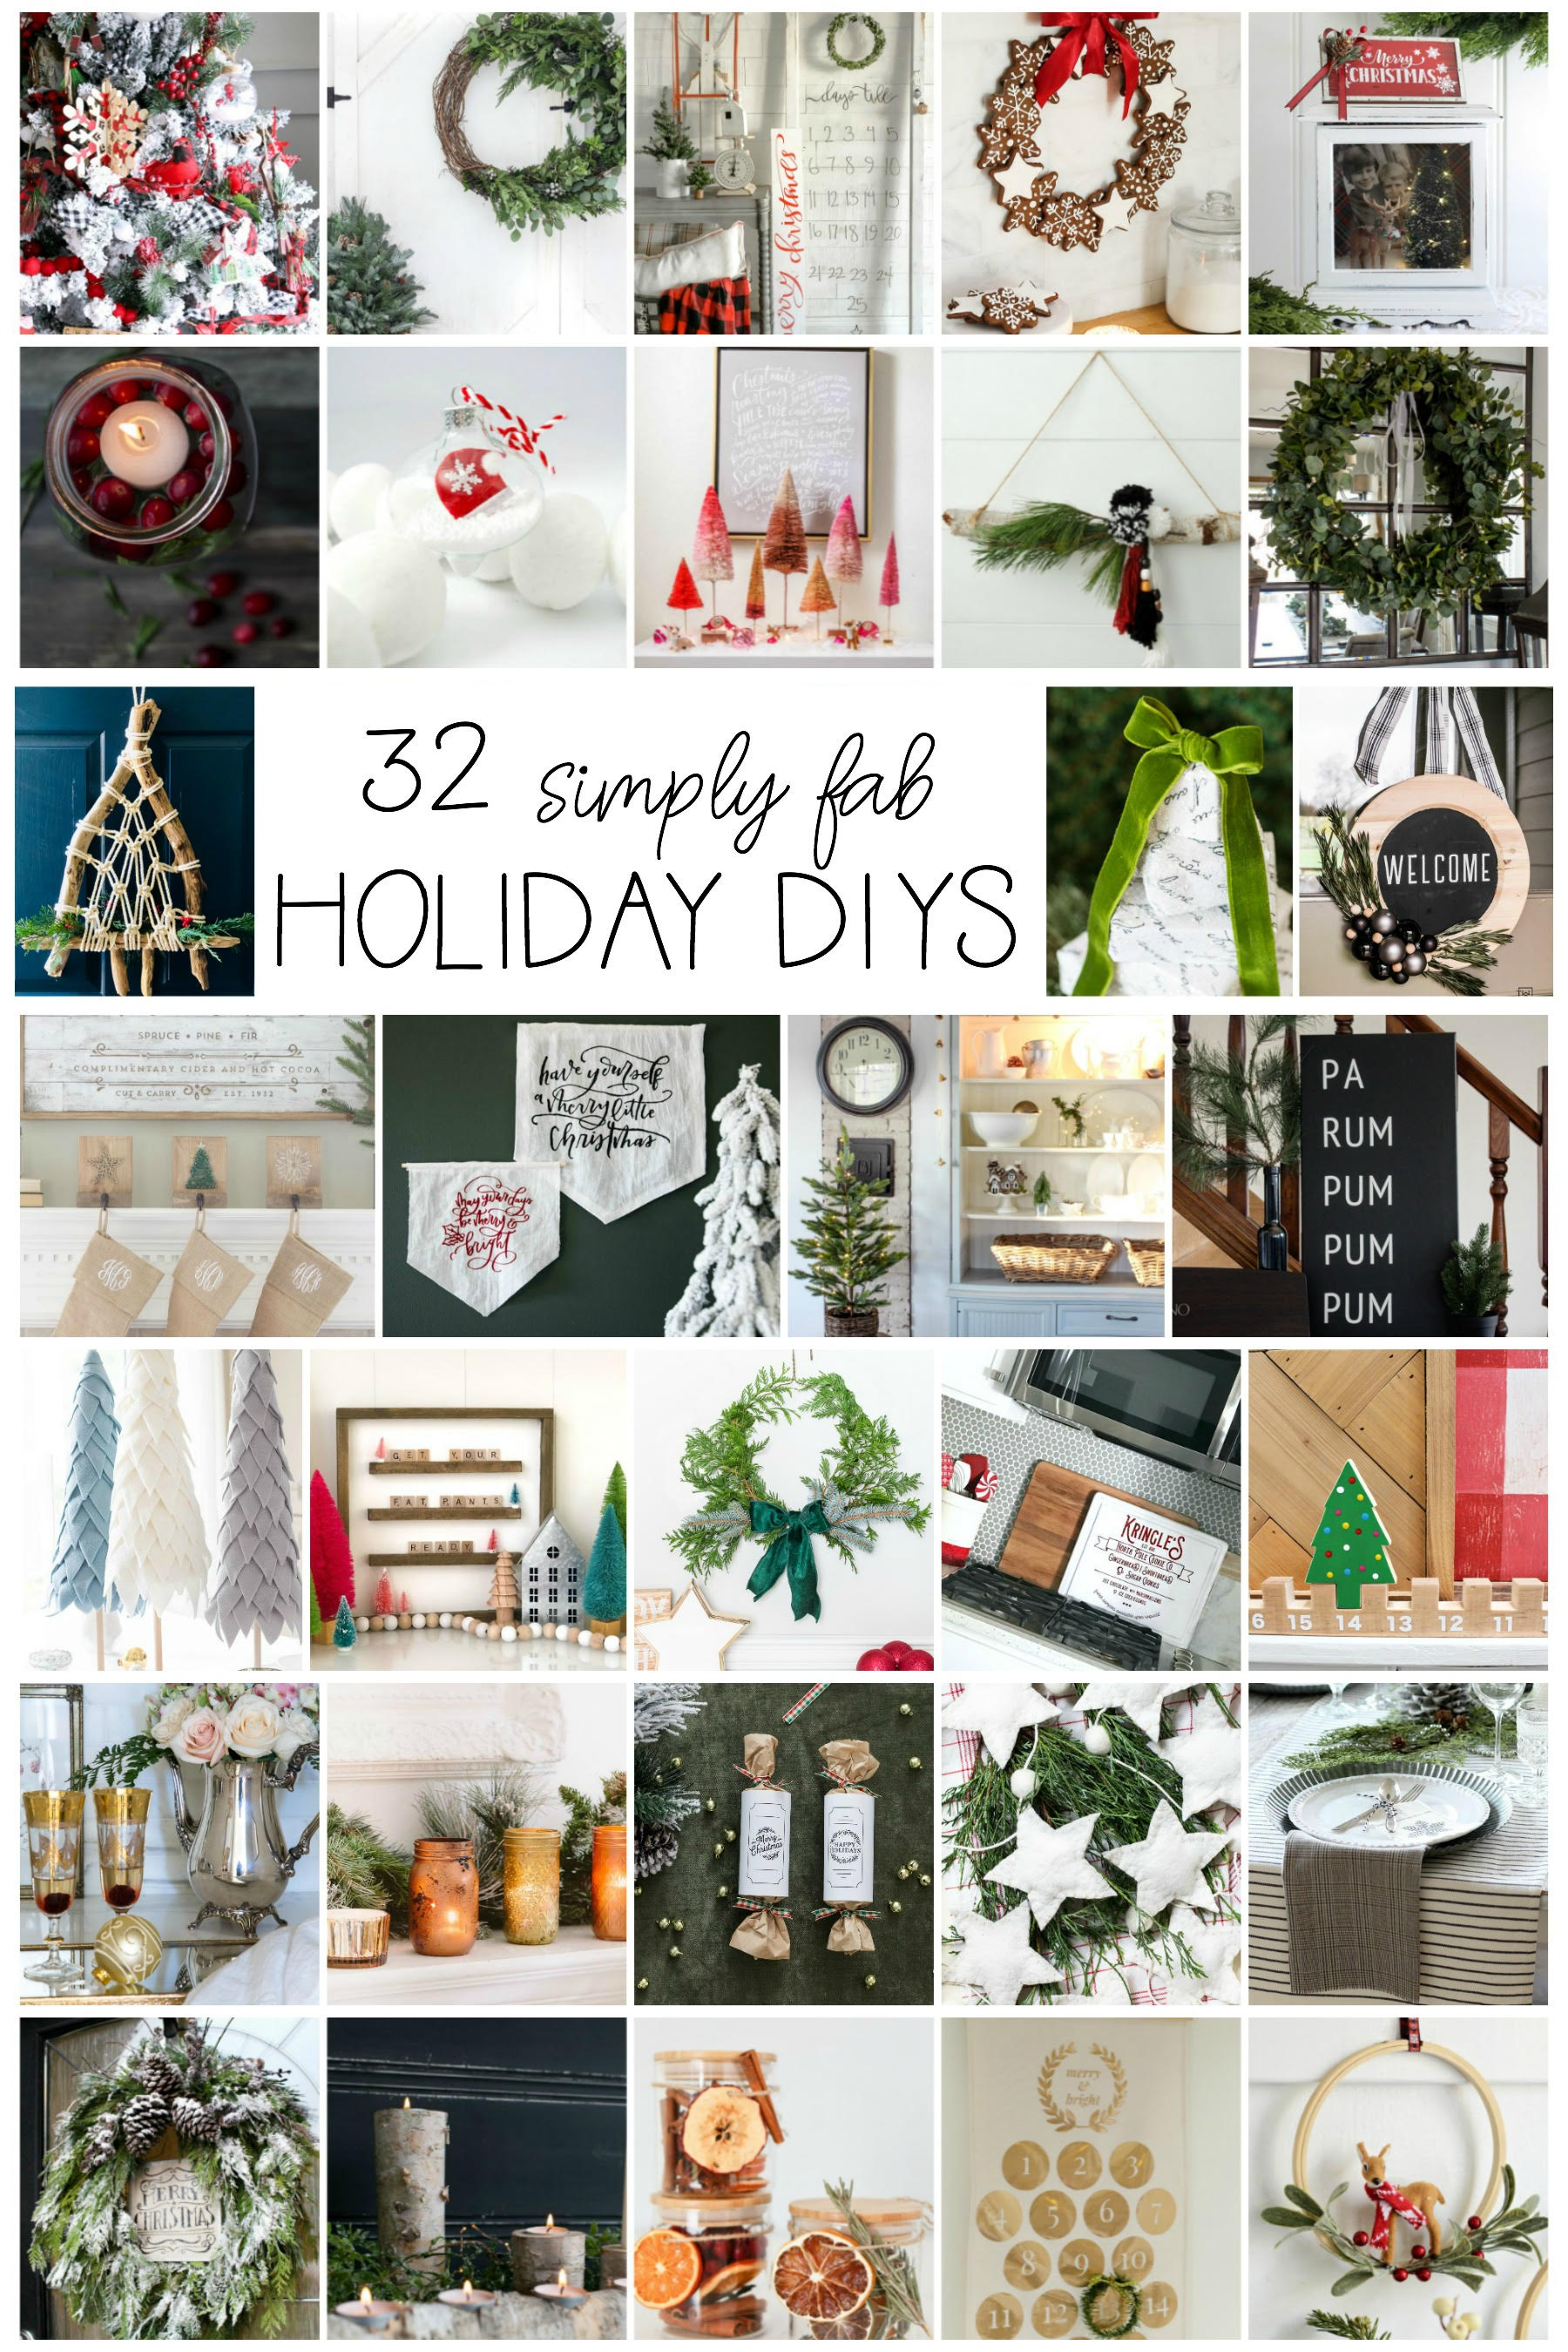 Tons of gorgeous holiday DIY projects!